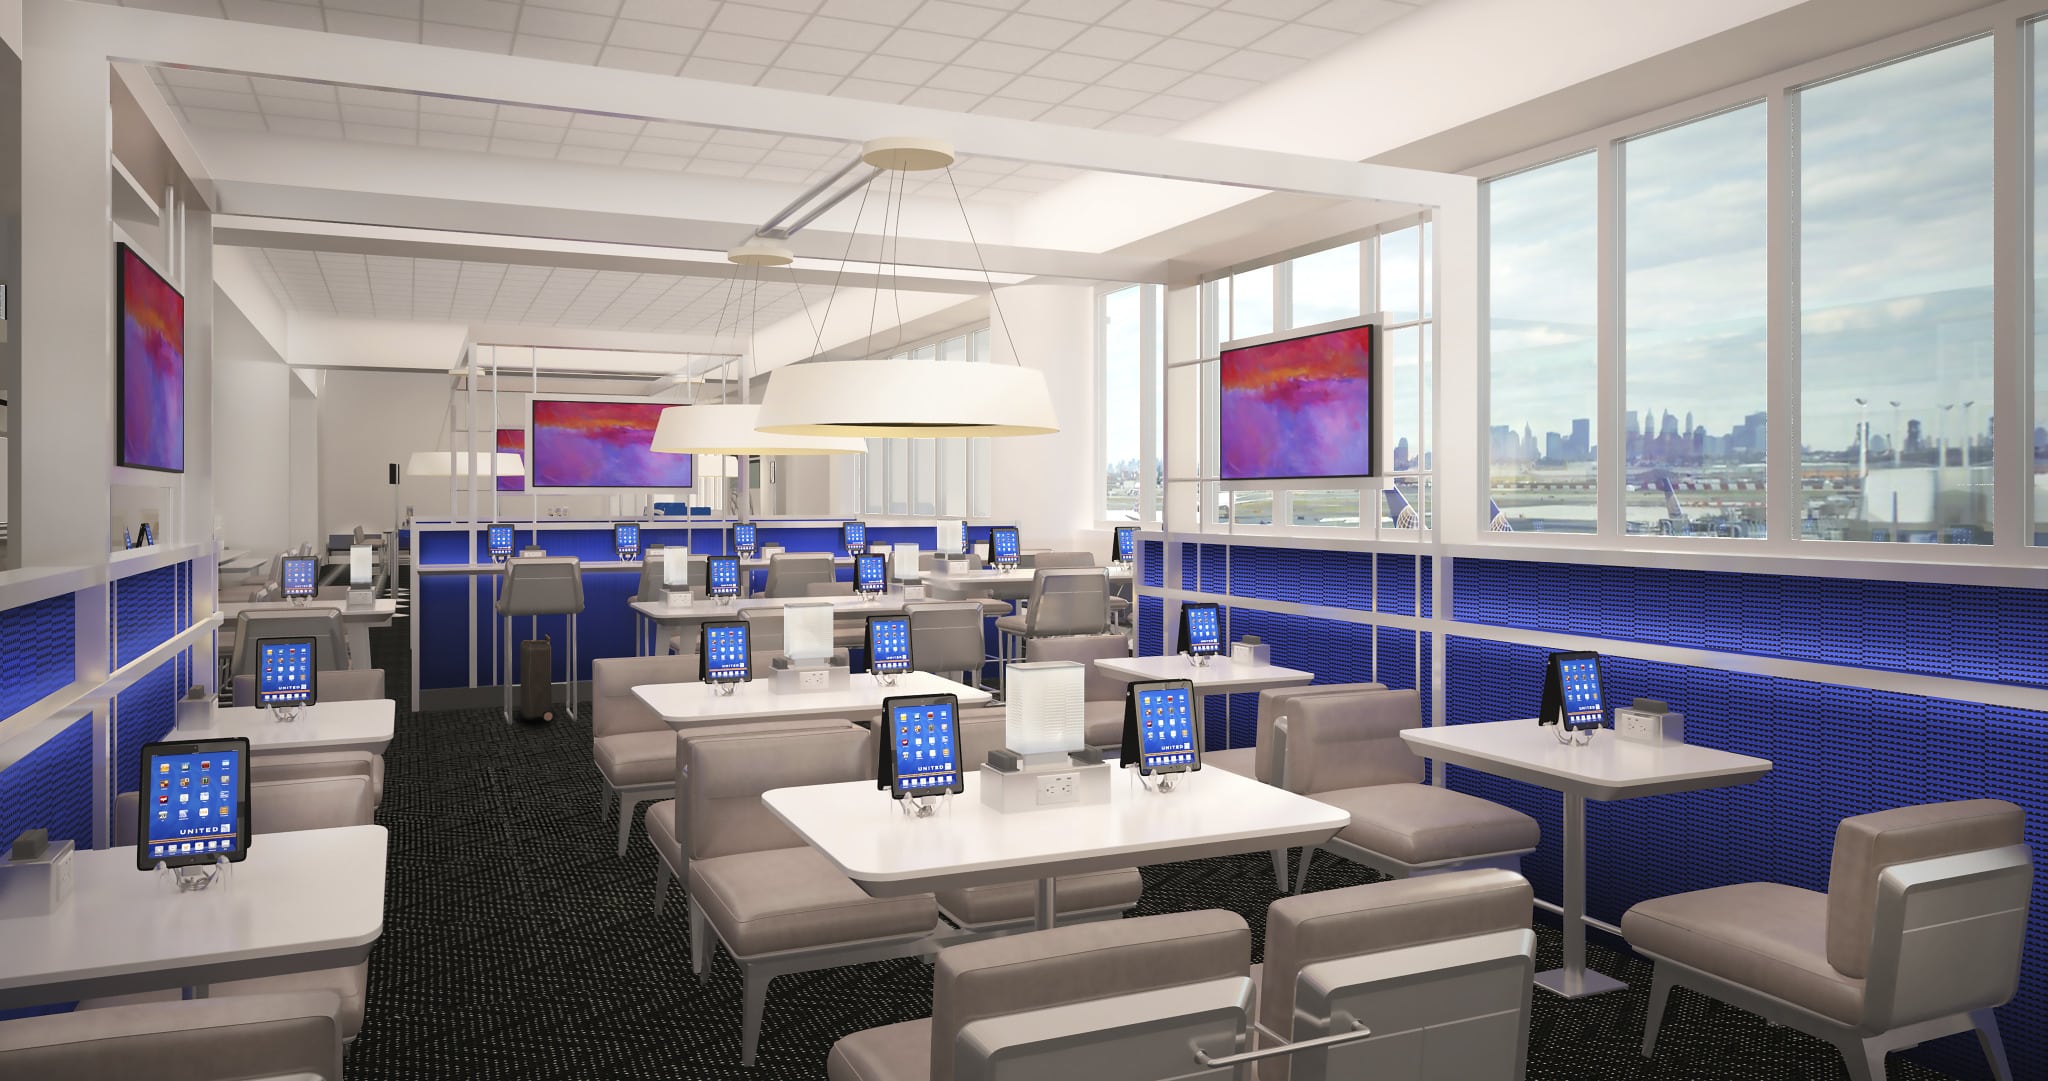 A rendering of iPads at a gate area of Newark's Terminal C, part of United Airlines and OTG's $120 million redesign project at the terminal.